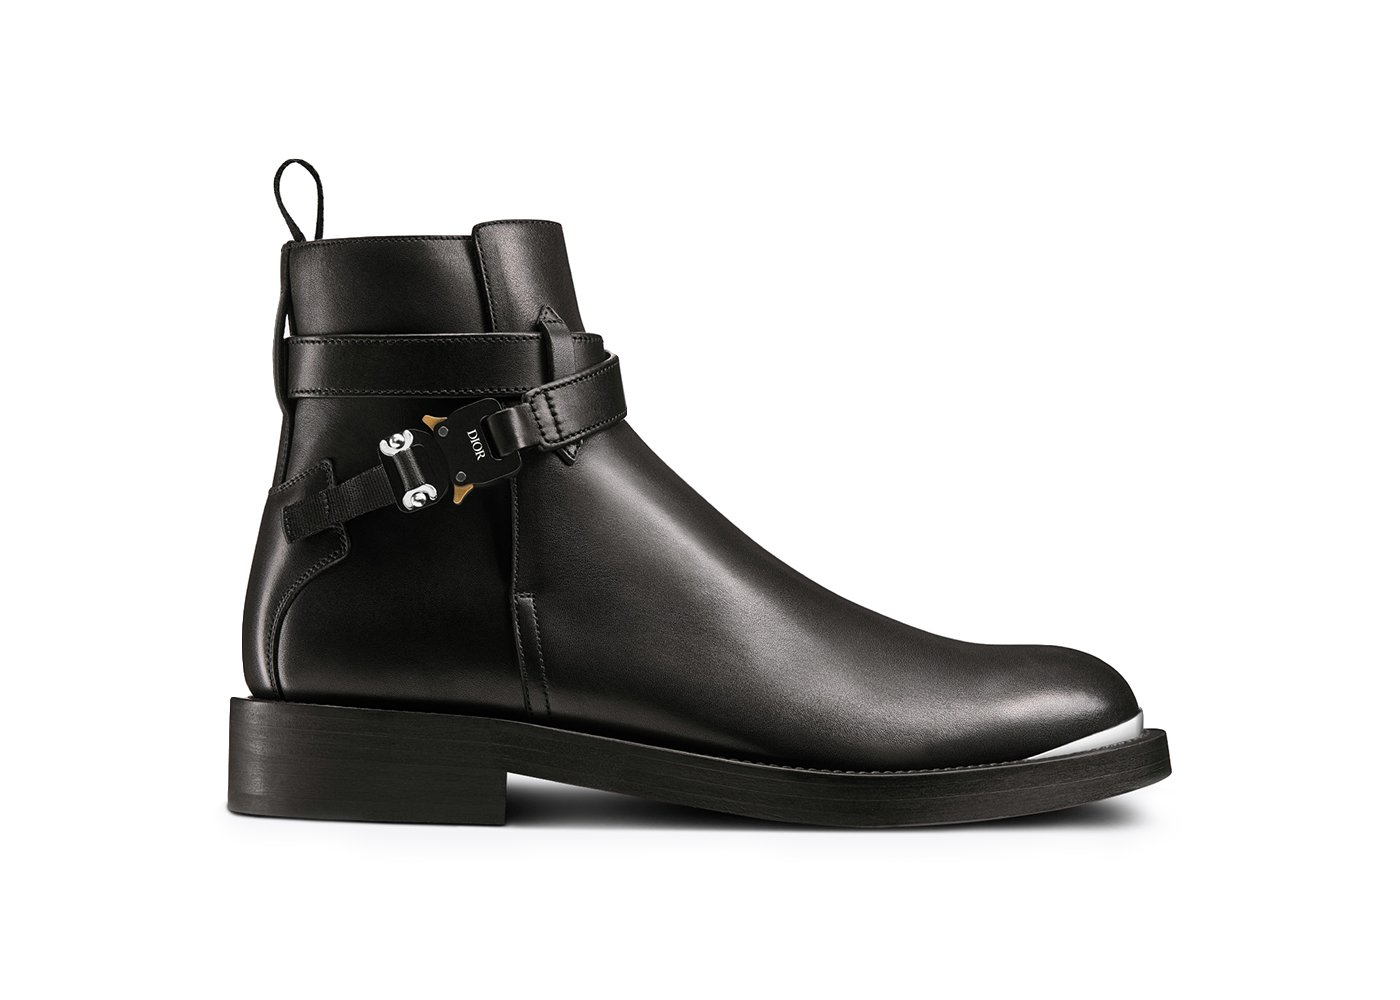 Dior Evidence Ankle Boot Black Smooth Calfskin sneakers